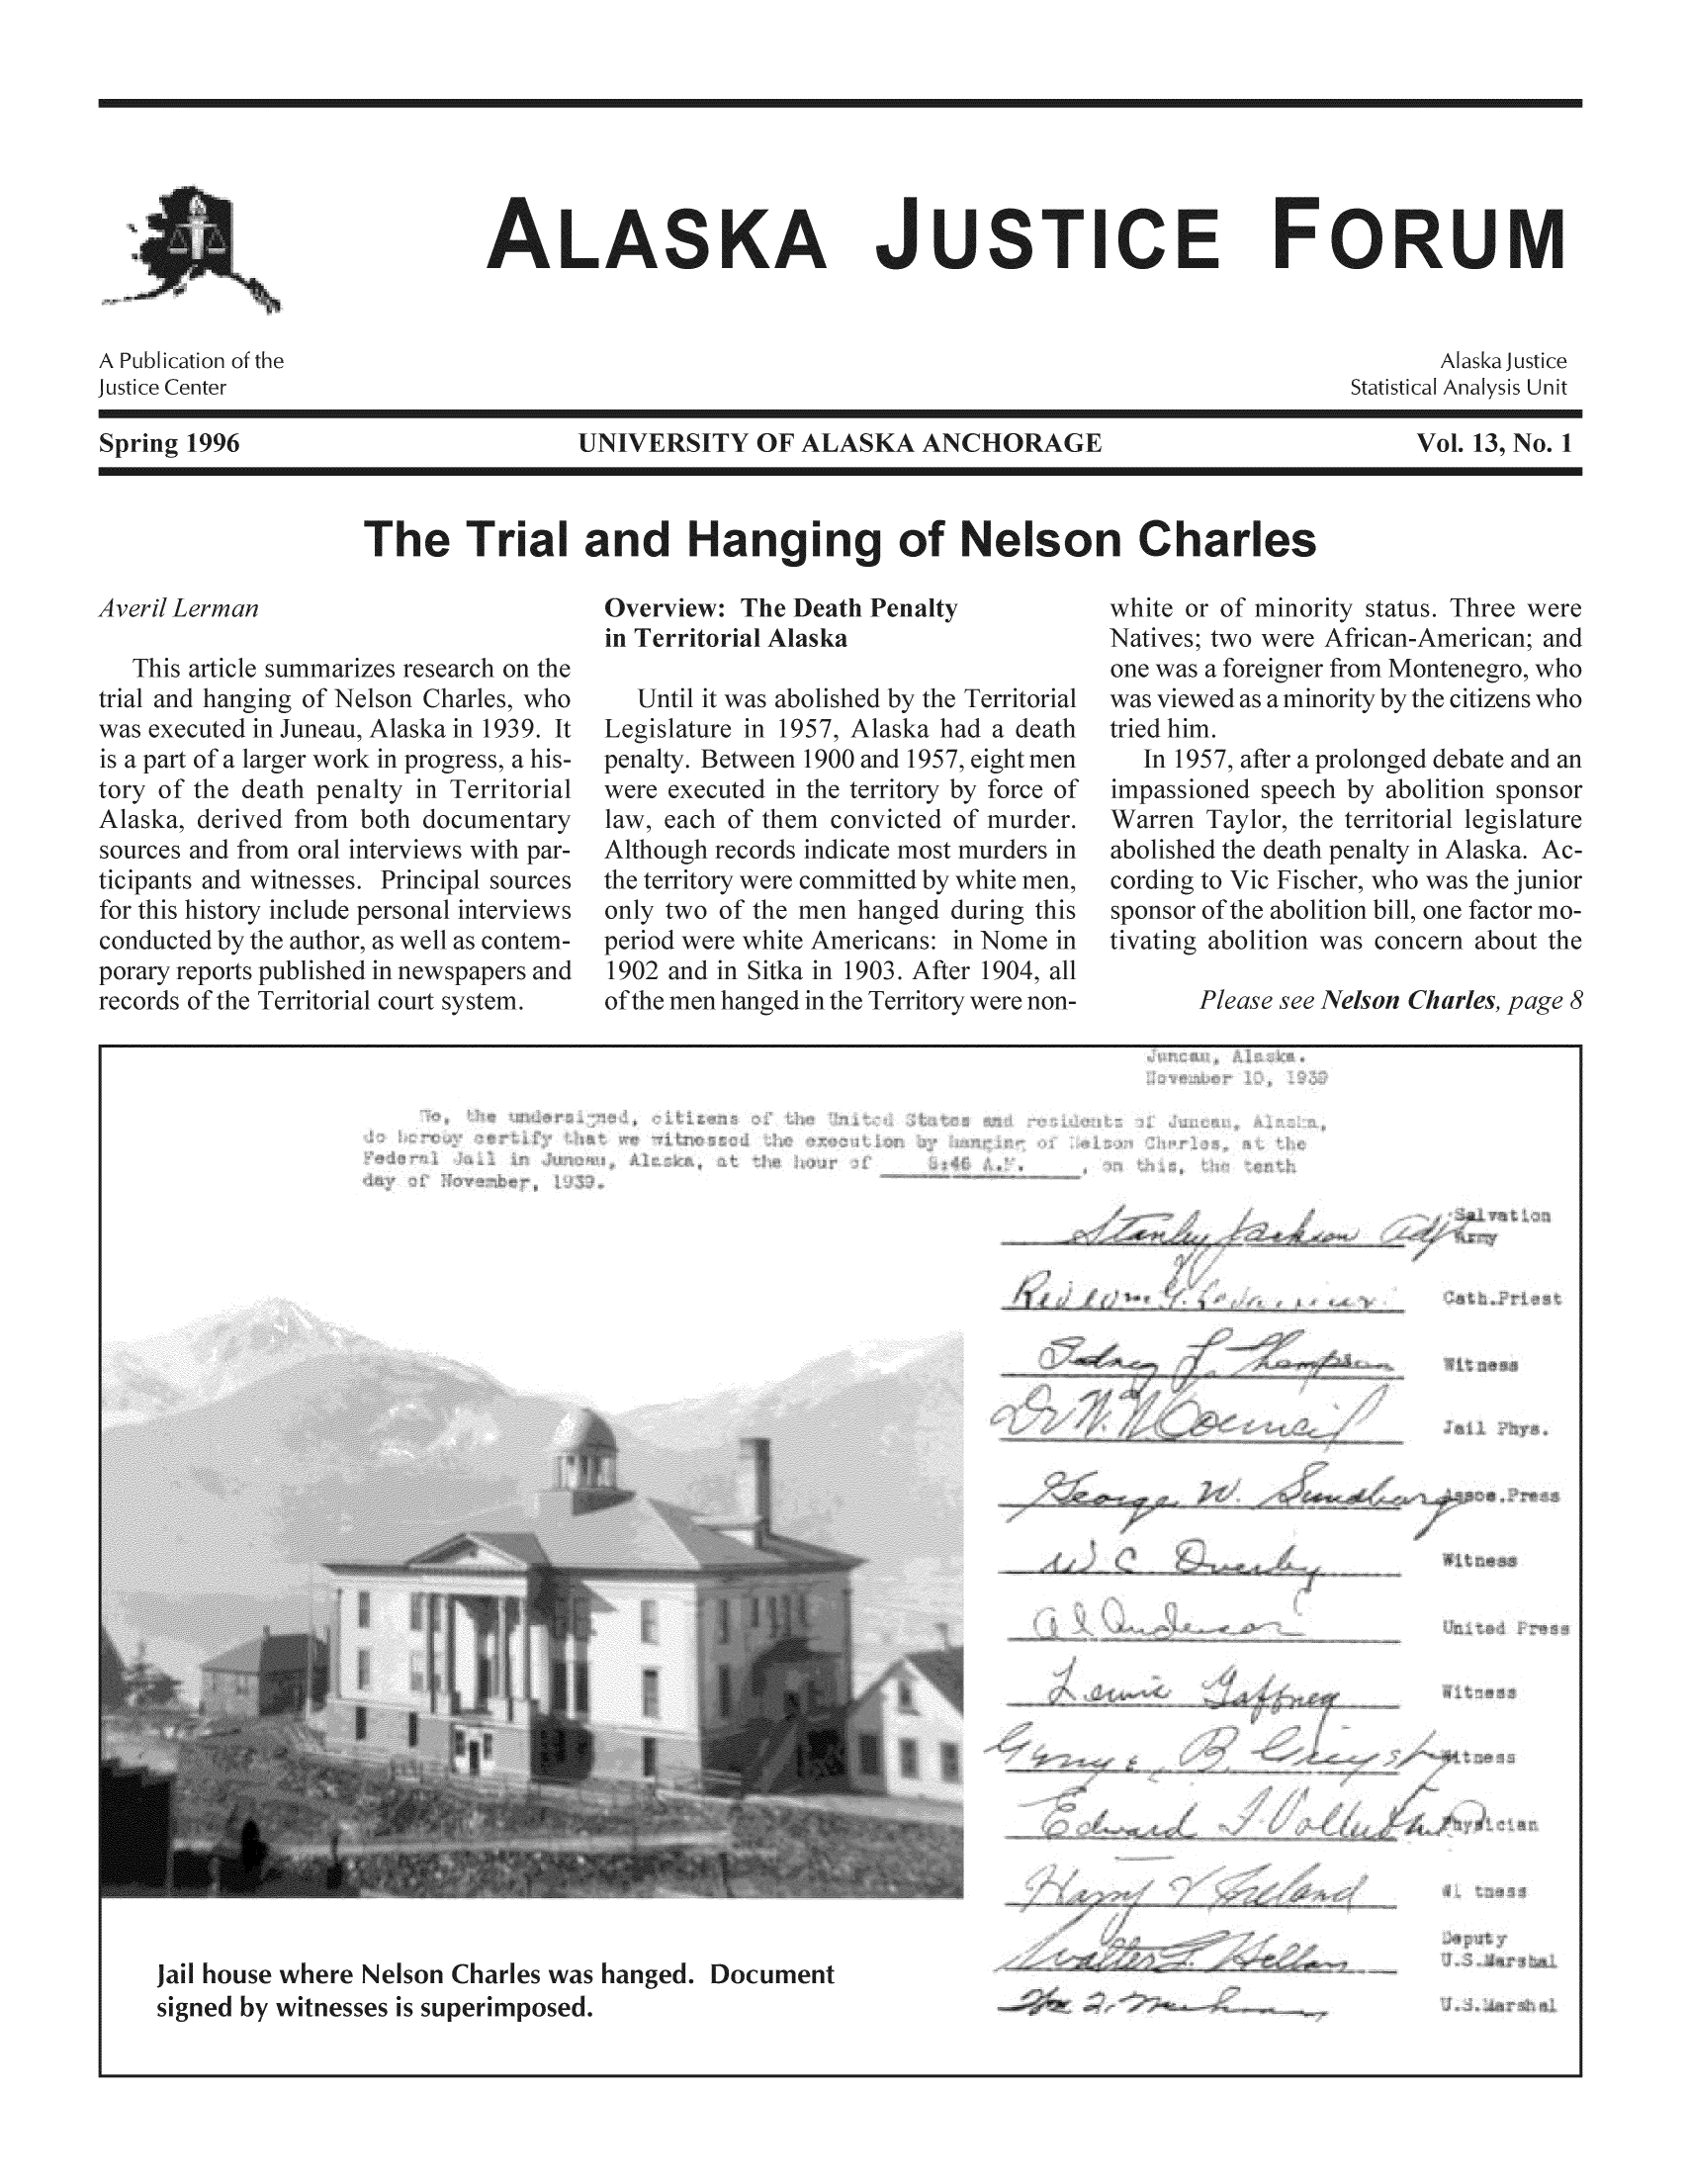 handle is hein.journals/aljufor13 and id is 1 raw text is: ALASKA JUSTICE FORUMUNIVERSITY OF ALASKA ANCHORAGIThe Trial and Hanging of Nelson CharlesOverview: The Death Penalt3in Territorial Alaskapenalt957, Alaska hn 1900 and 195'force of imppeporary reports ptrecords of the Tcapaspapc1902)fth)f the men hanged durinewhite Americans: in Non Sitka in 1903. After 19C'anged in the Territory wer,Jail house where Nelson Charles was hanged. Documentsigned by witnesses is superimposed.Spring 1996part of7ol. 13, No. 11939.I pri foreianer fr(1957, aftersioned spesponsor of!Nelson C4